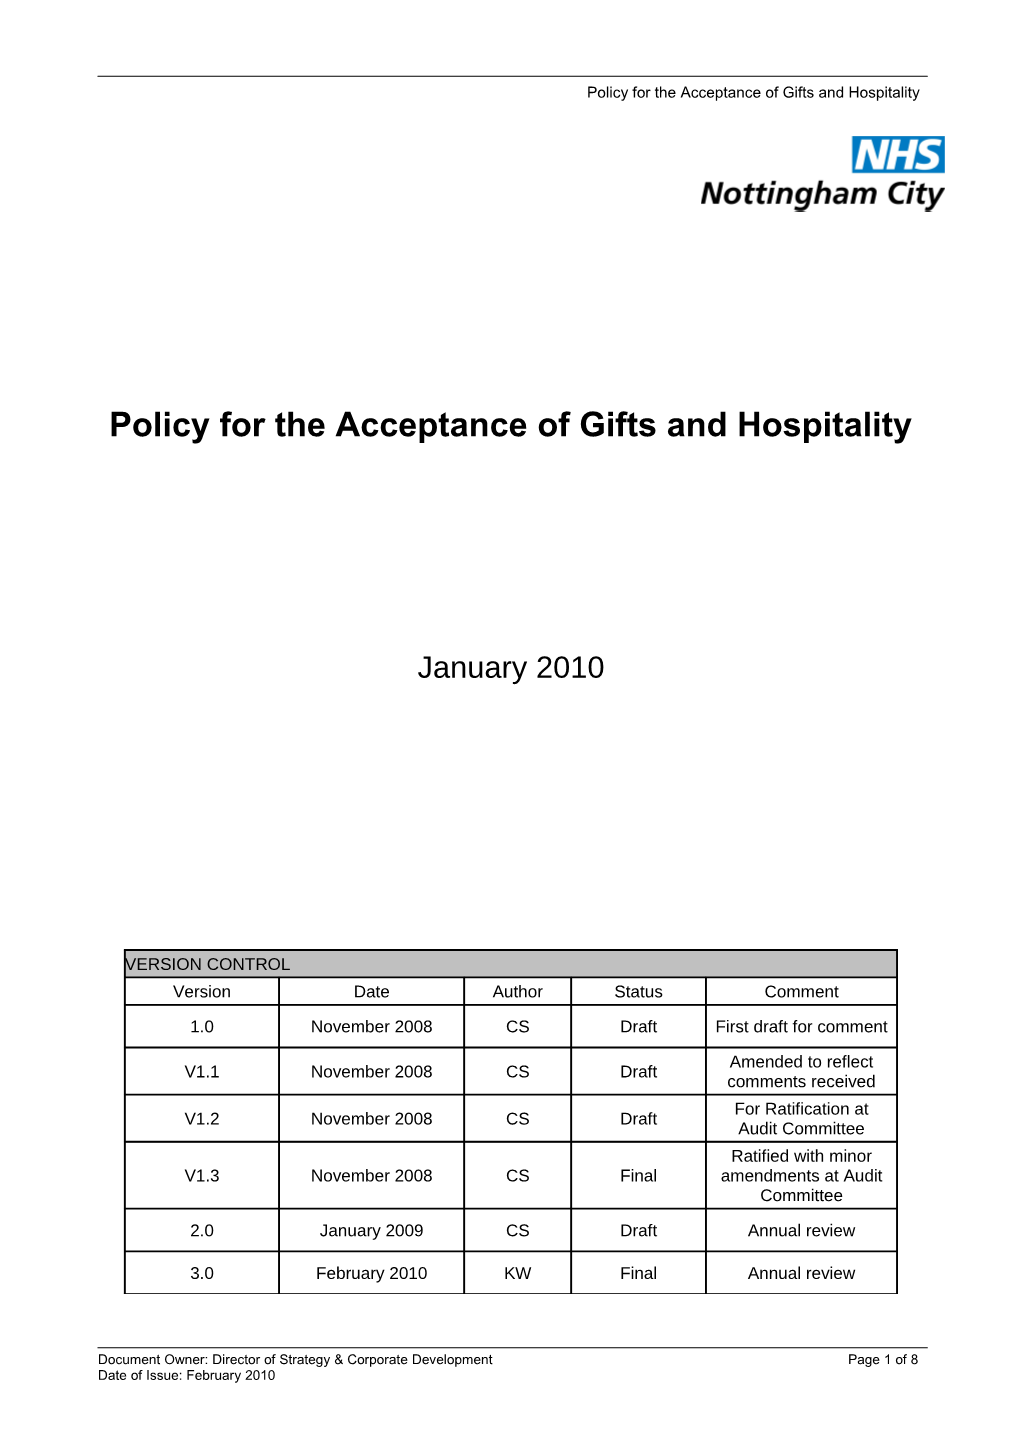 Policy for the Acceptance of Gifts and Hospitality